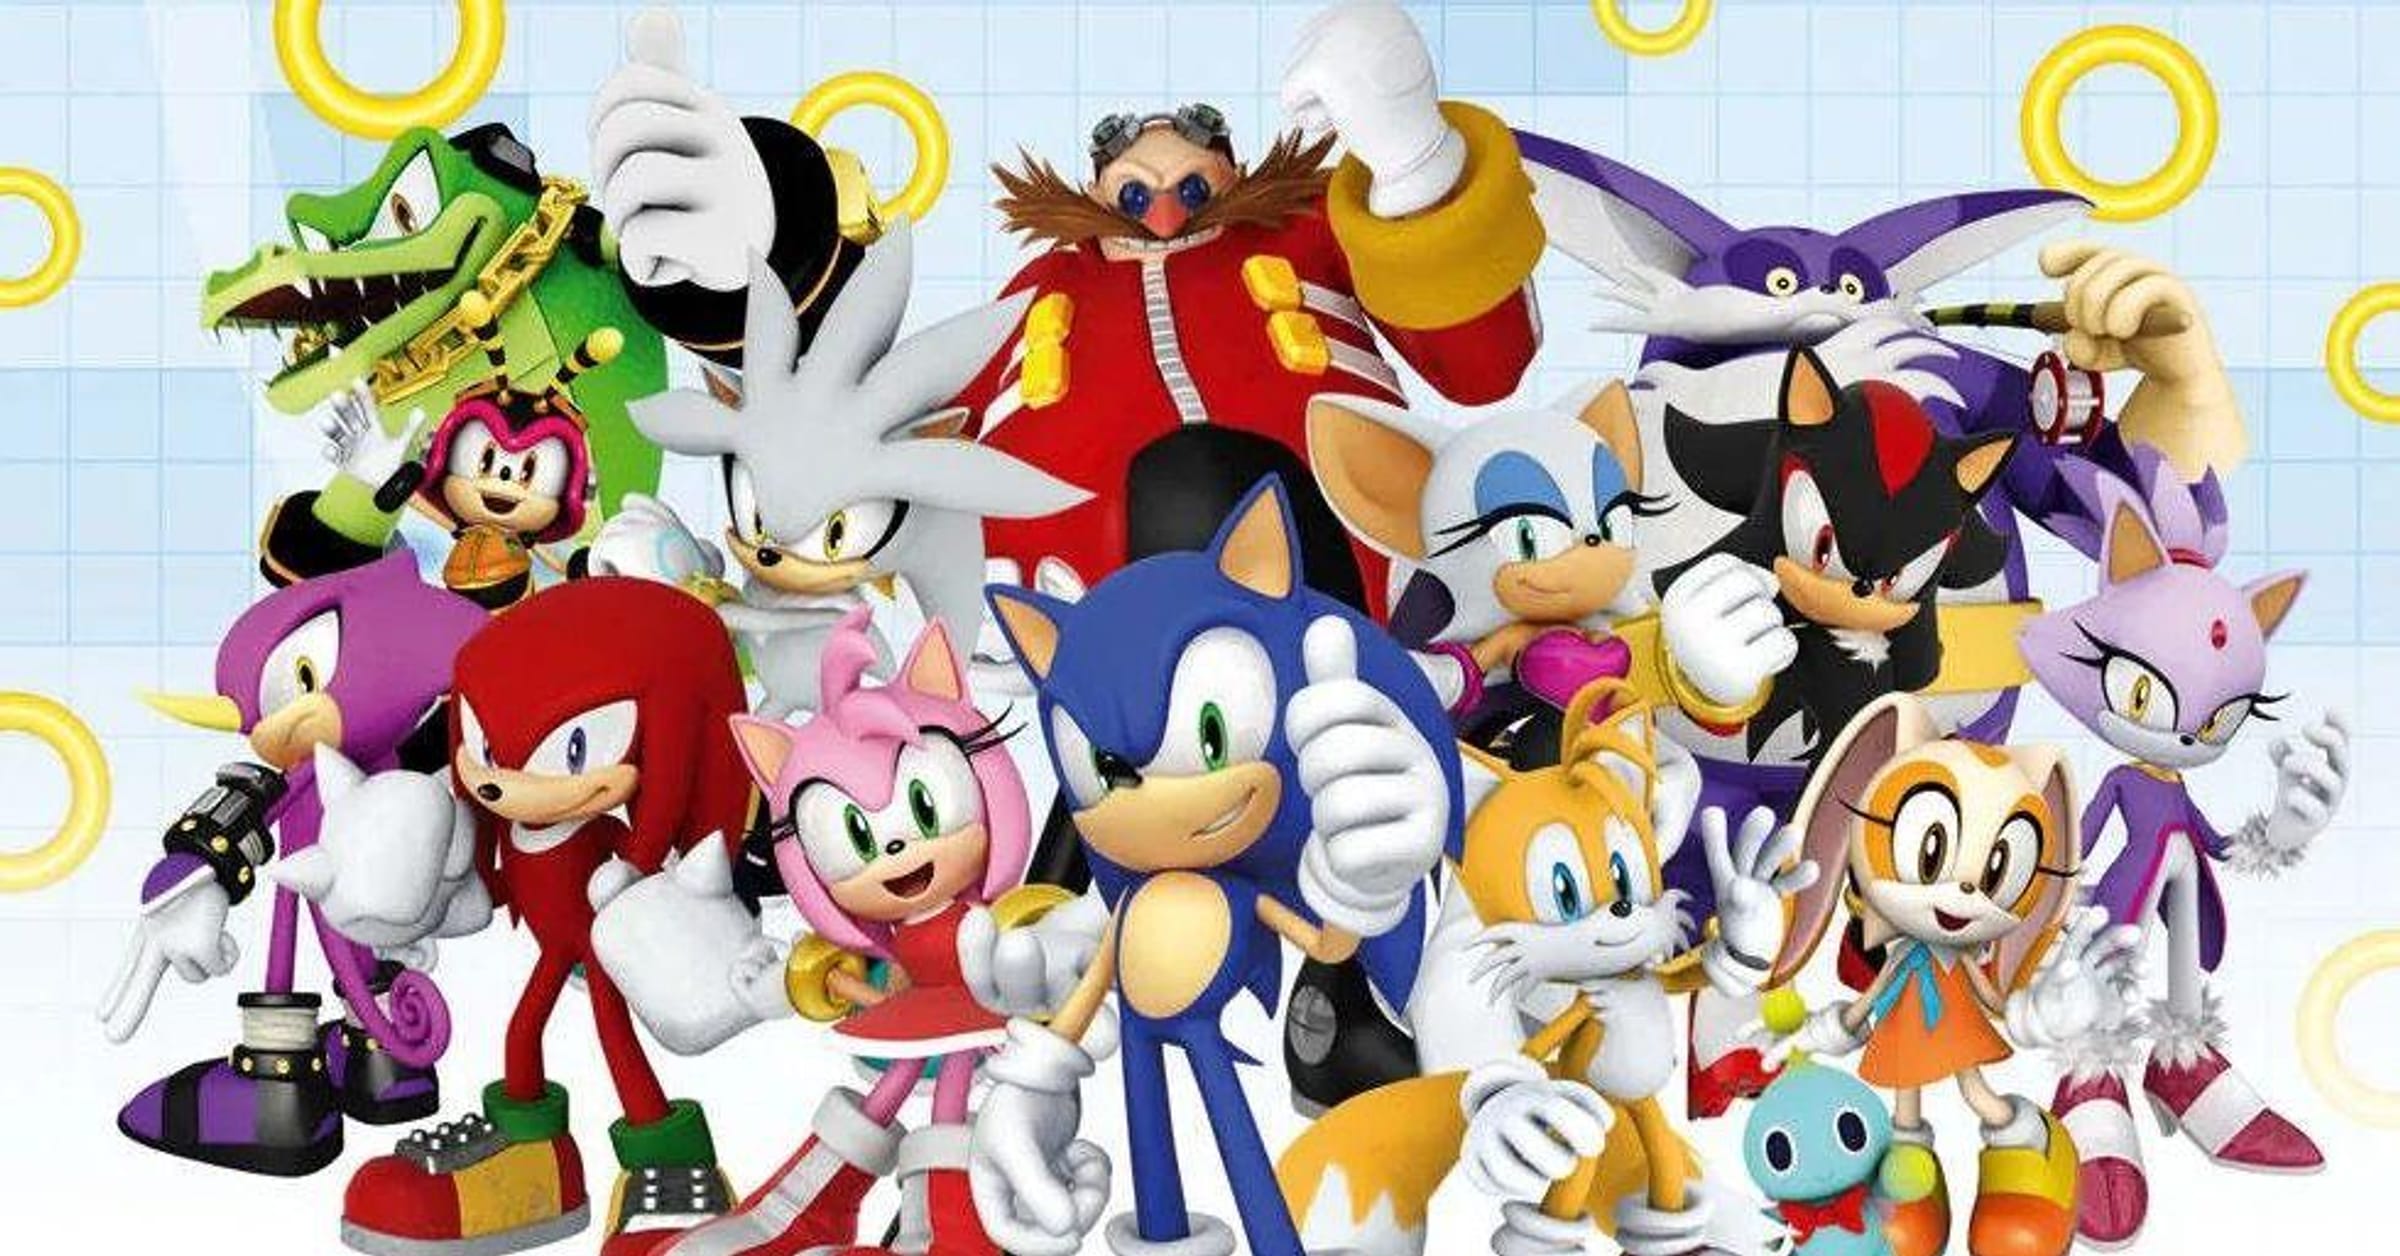 Sonic The Hedgehog: 10 Best Characters In The Franchise, Ranked